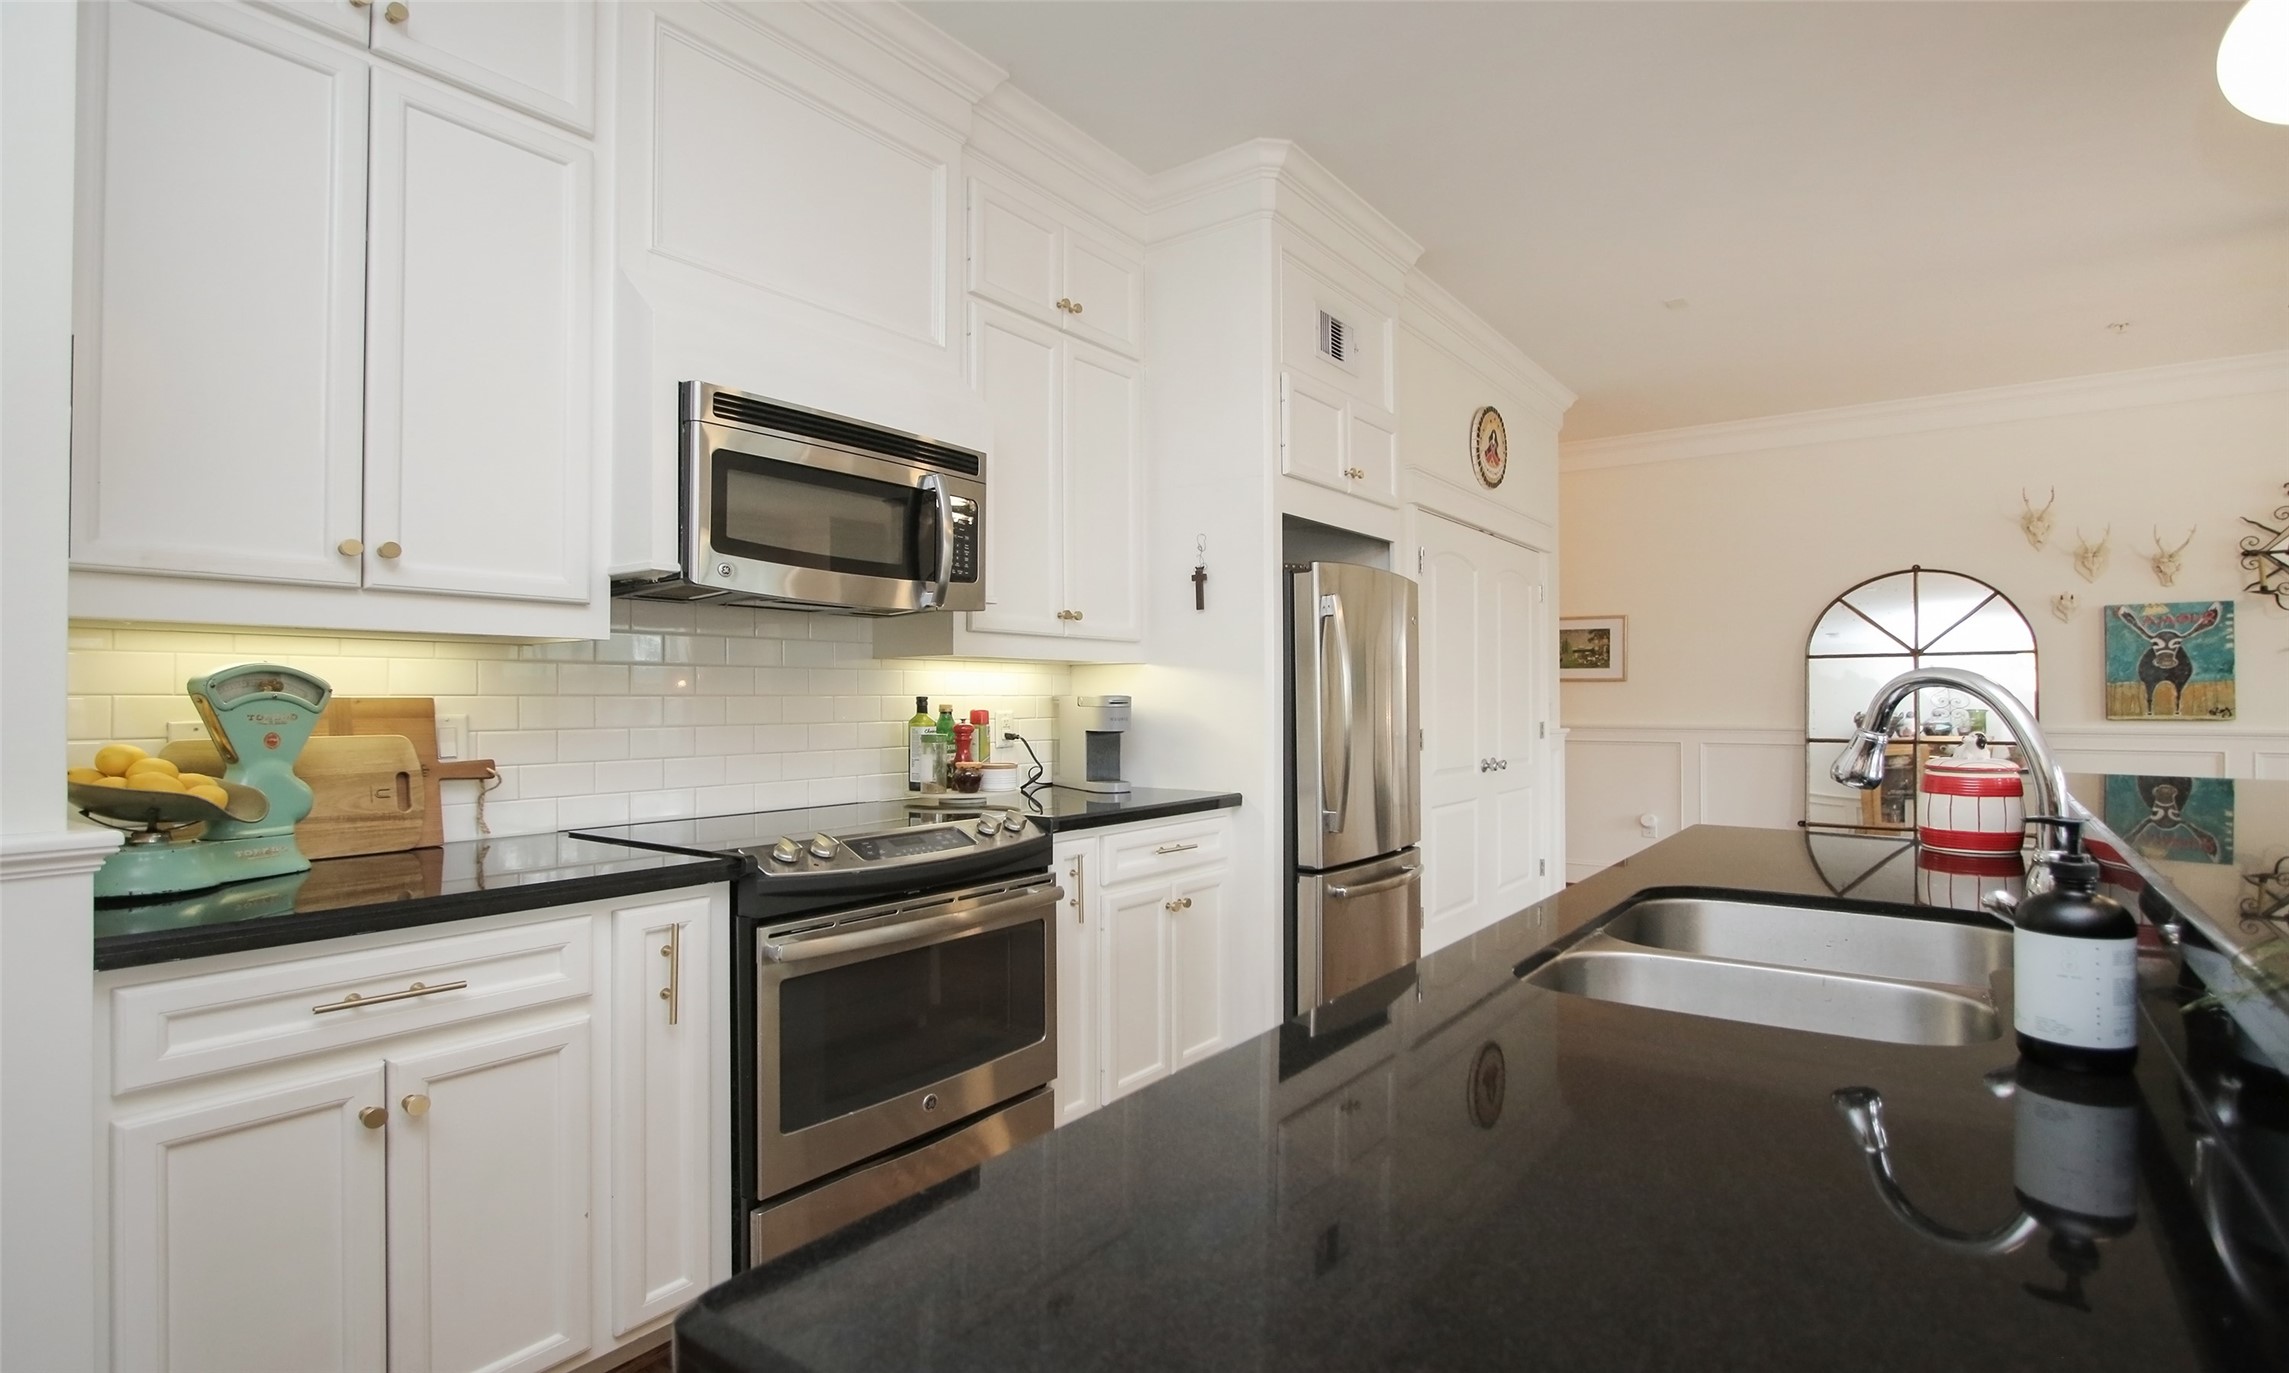 Notice all of the gleaming granite counter space. There is also a large double door pantry.